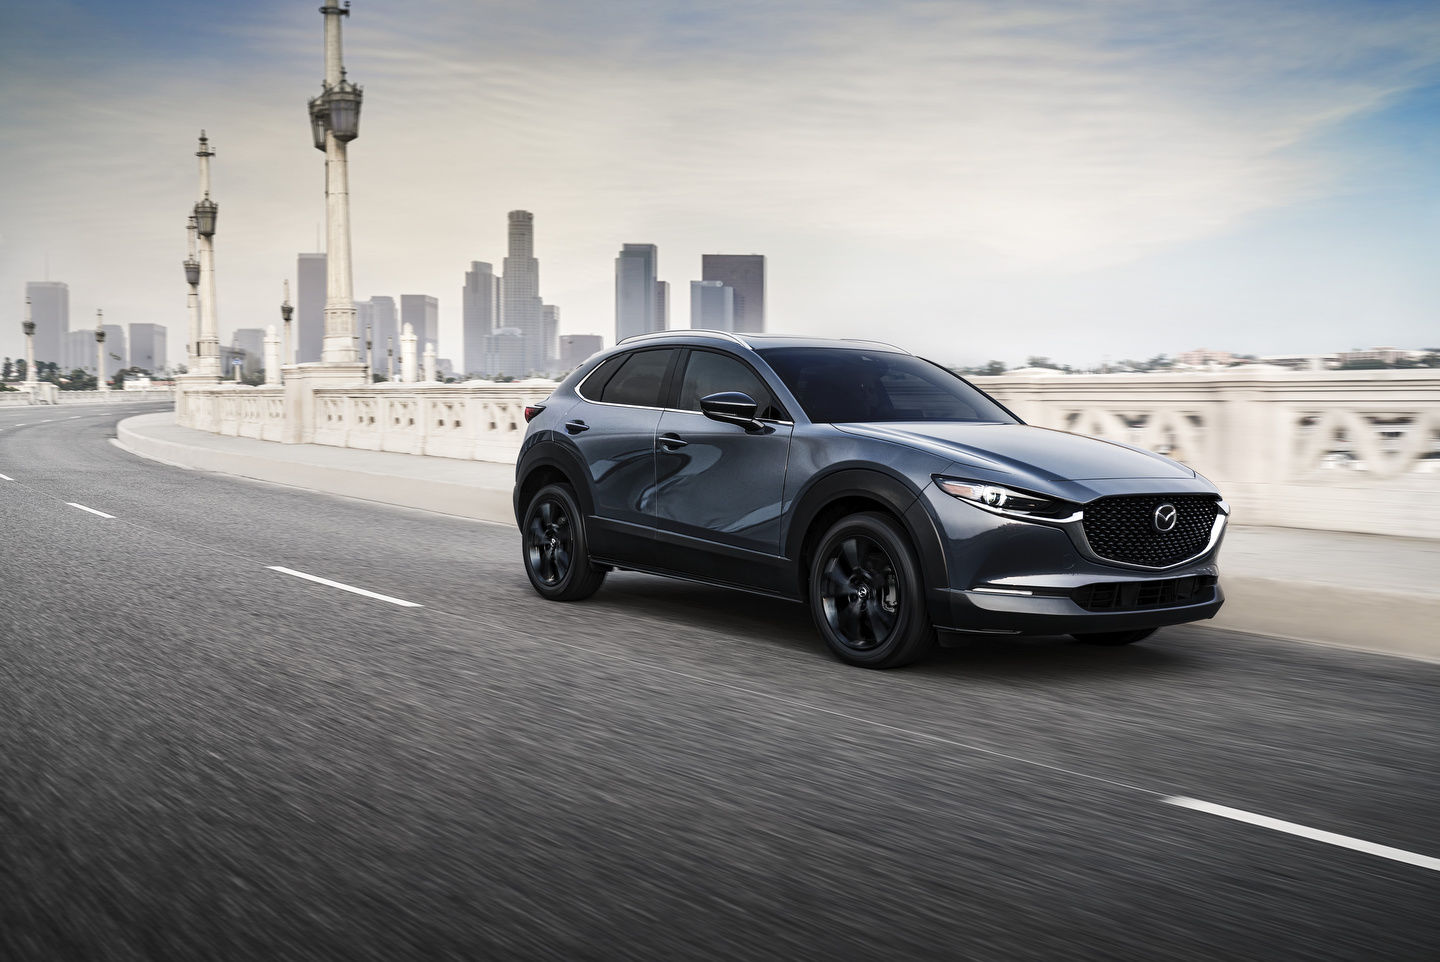 2022 Mazda CX-30 or 2022 Mazda CX-5: Which is Right for you?